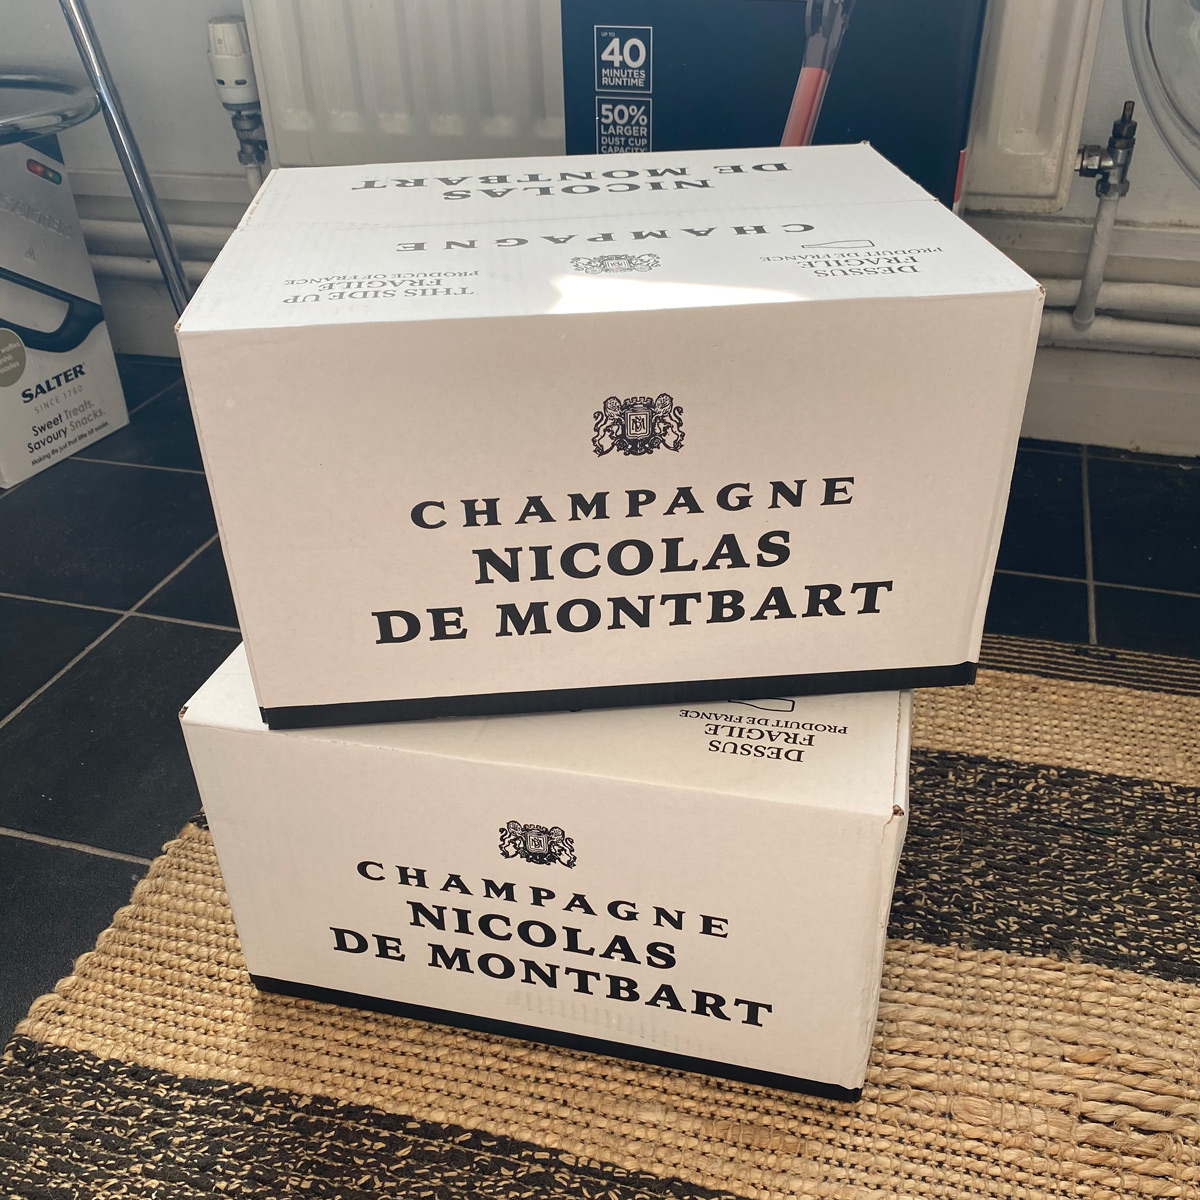 Two boxes of champagne